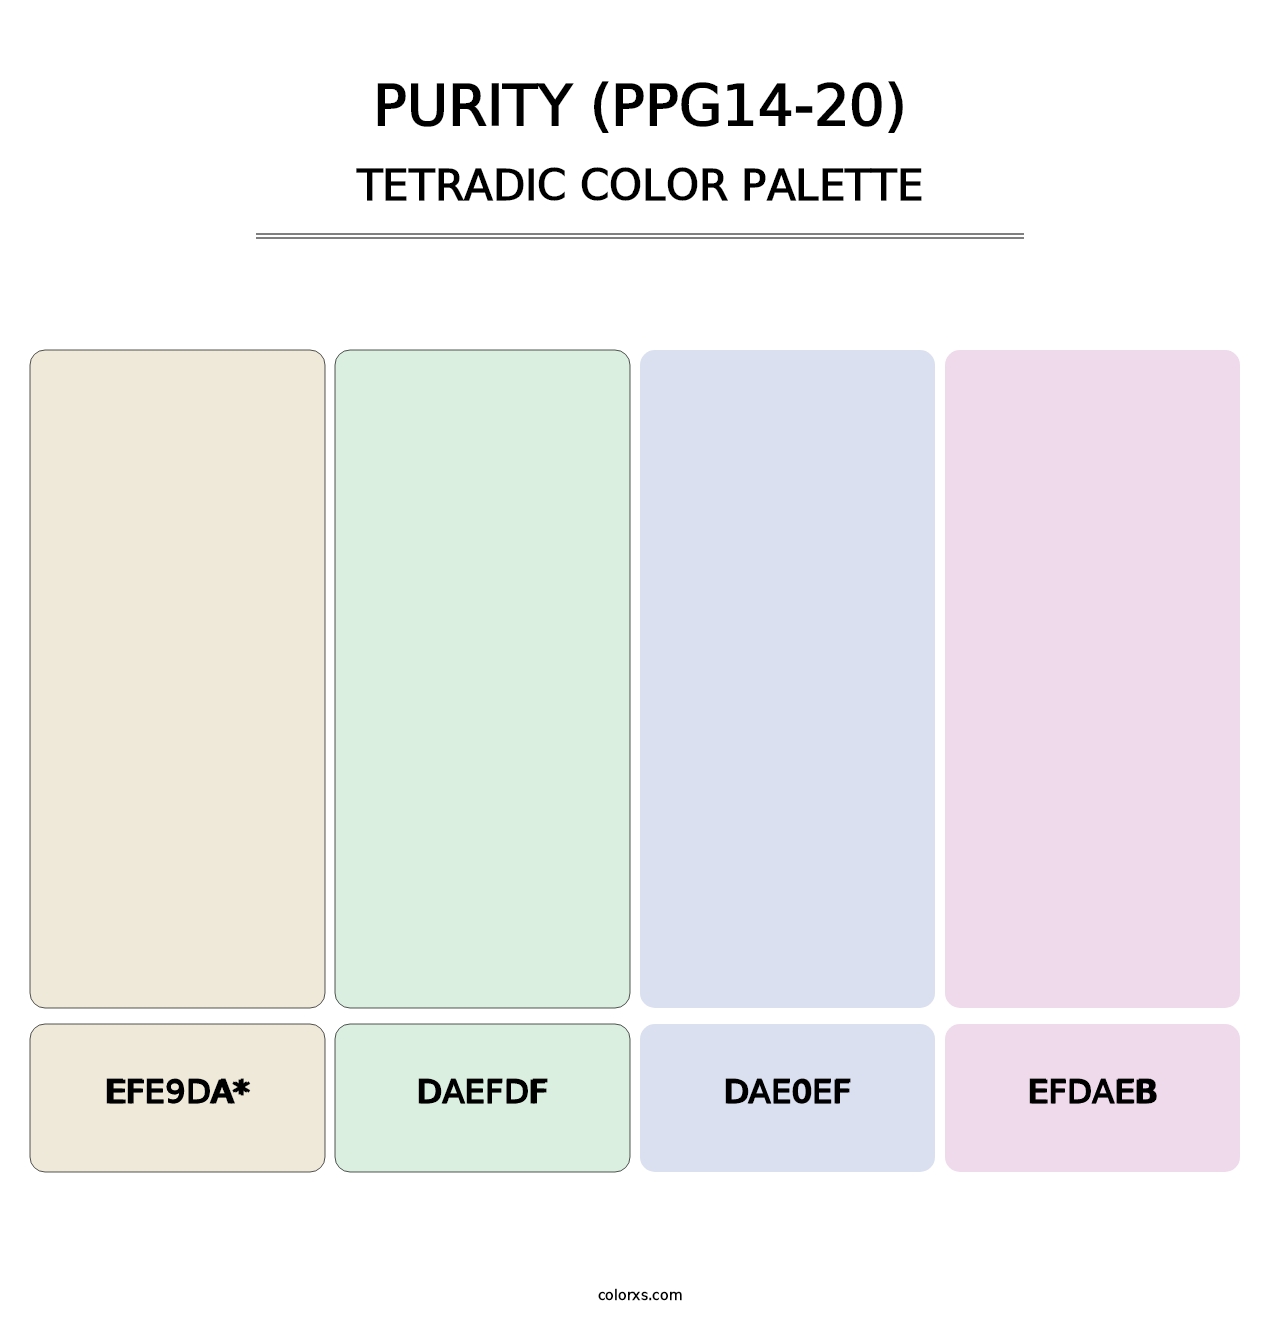 Purity (PPG14-20) - Tetradic Color Palette